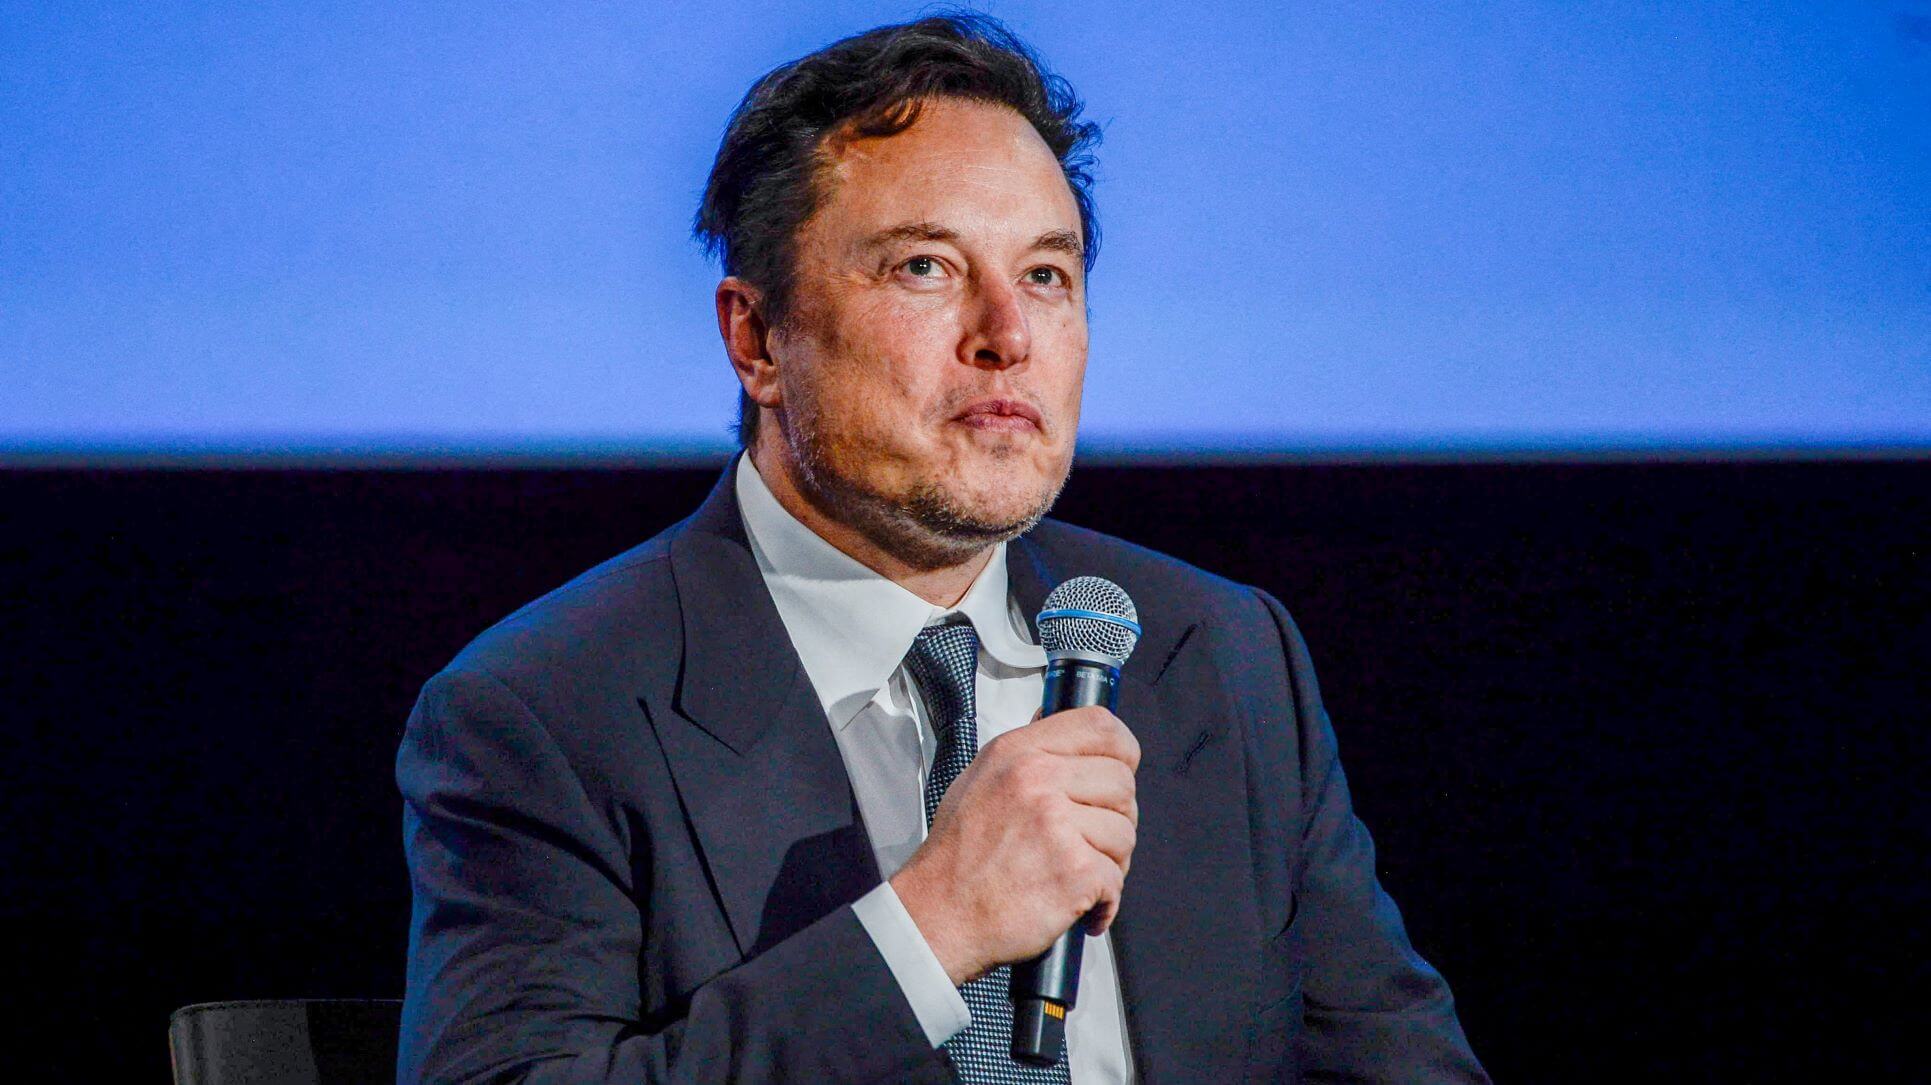 Elon Musk And Others Urge AI Pause, Citing 'Risks To Society'